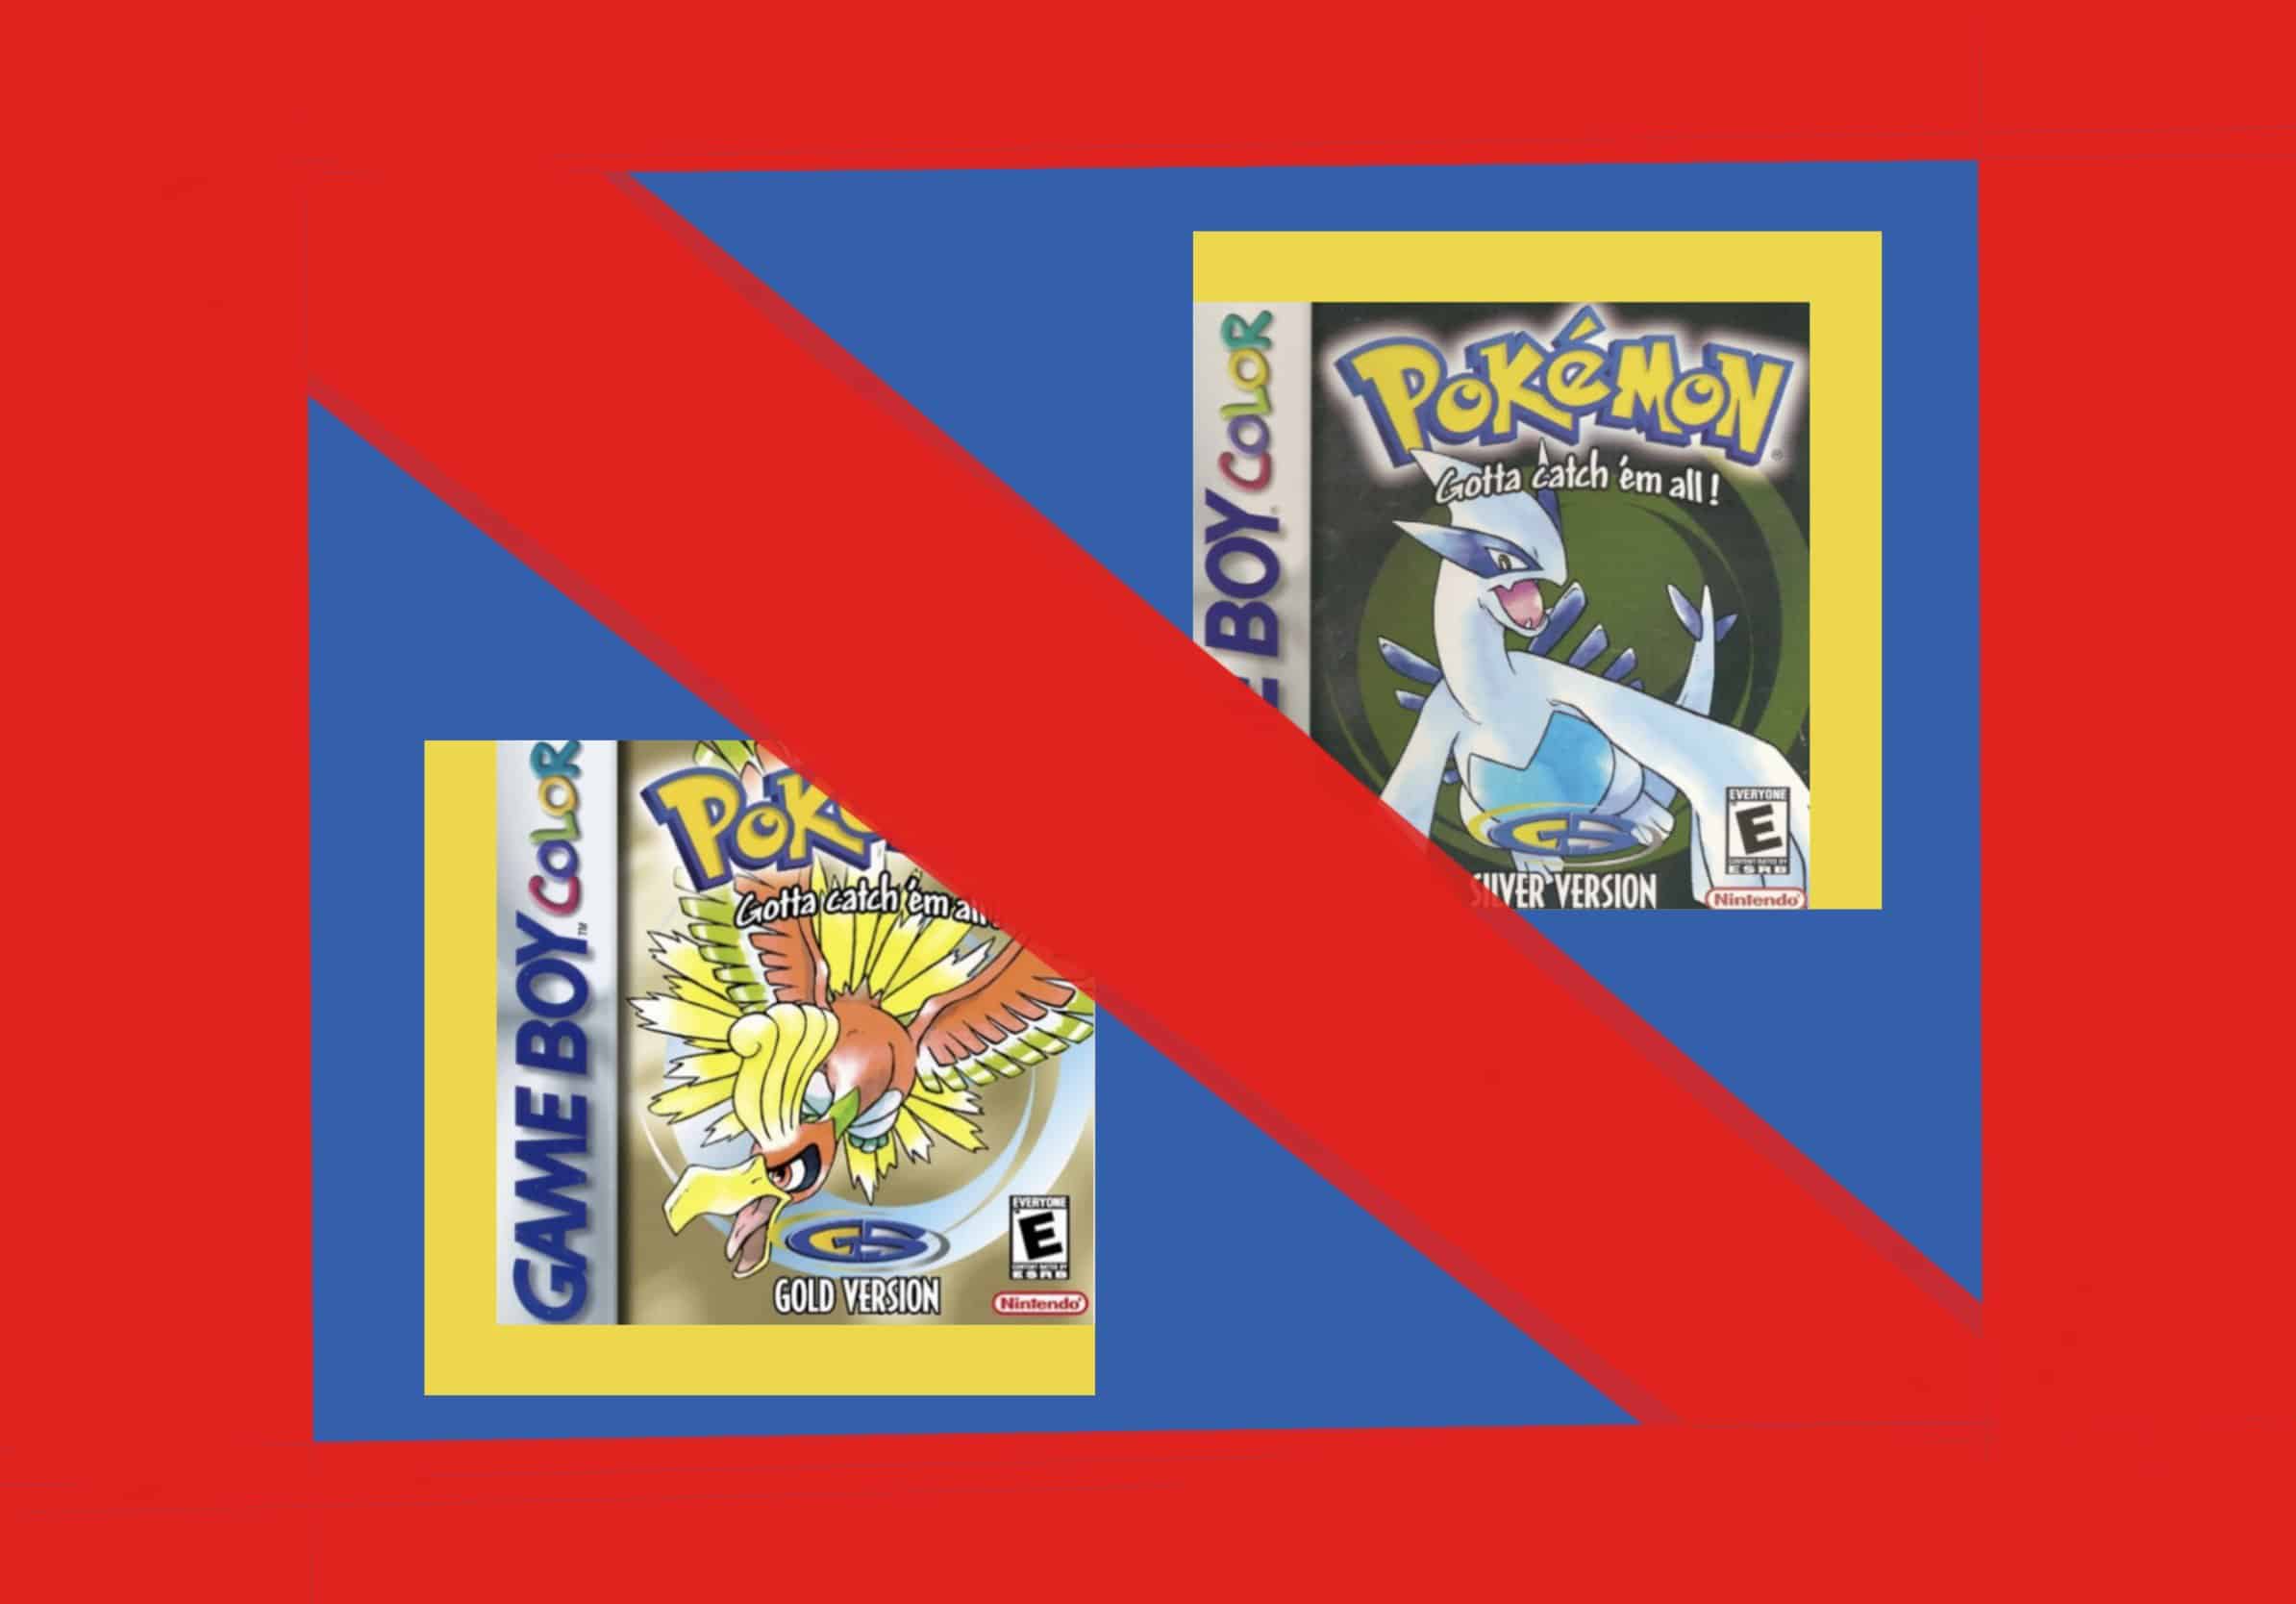 Comparing Pokemon Gold and Silver with their Nintendo DS remakes